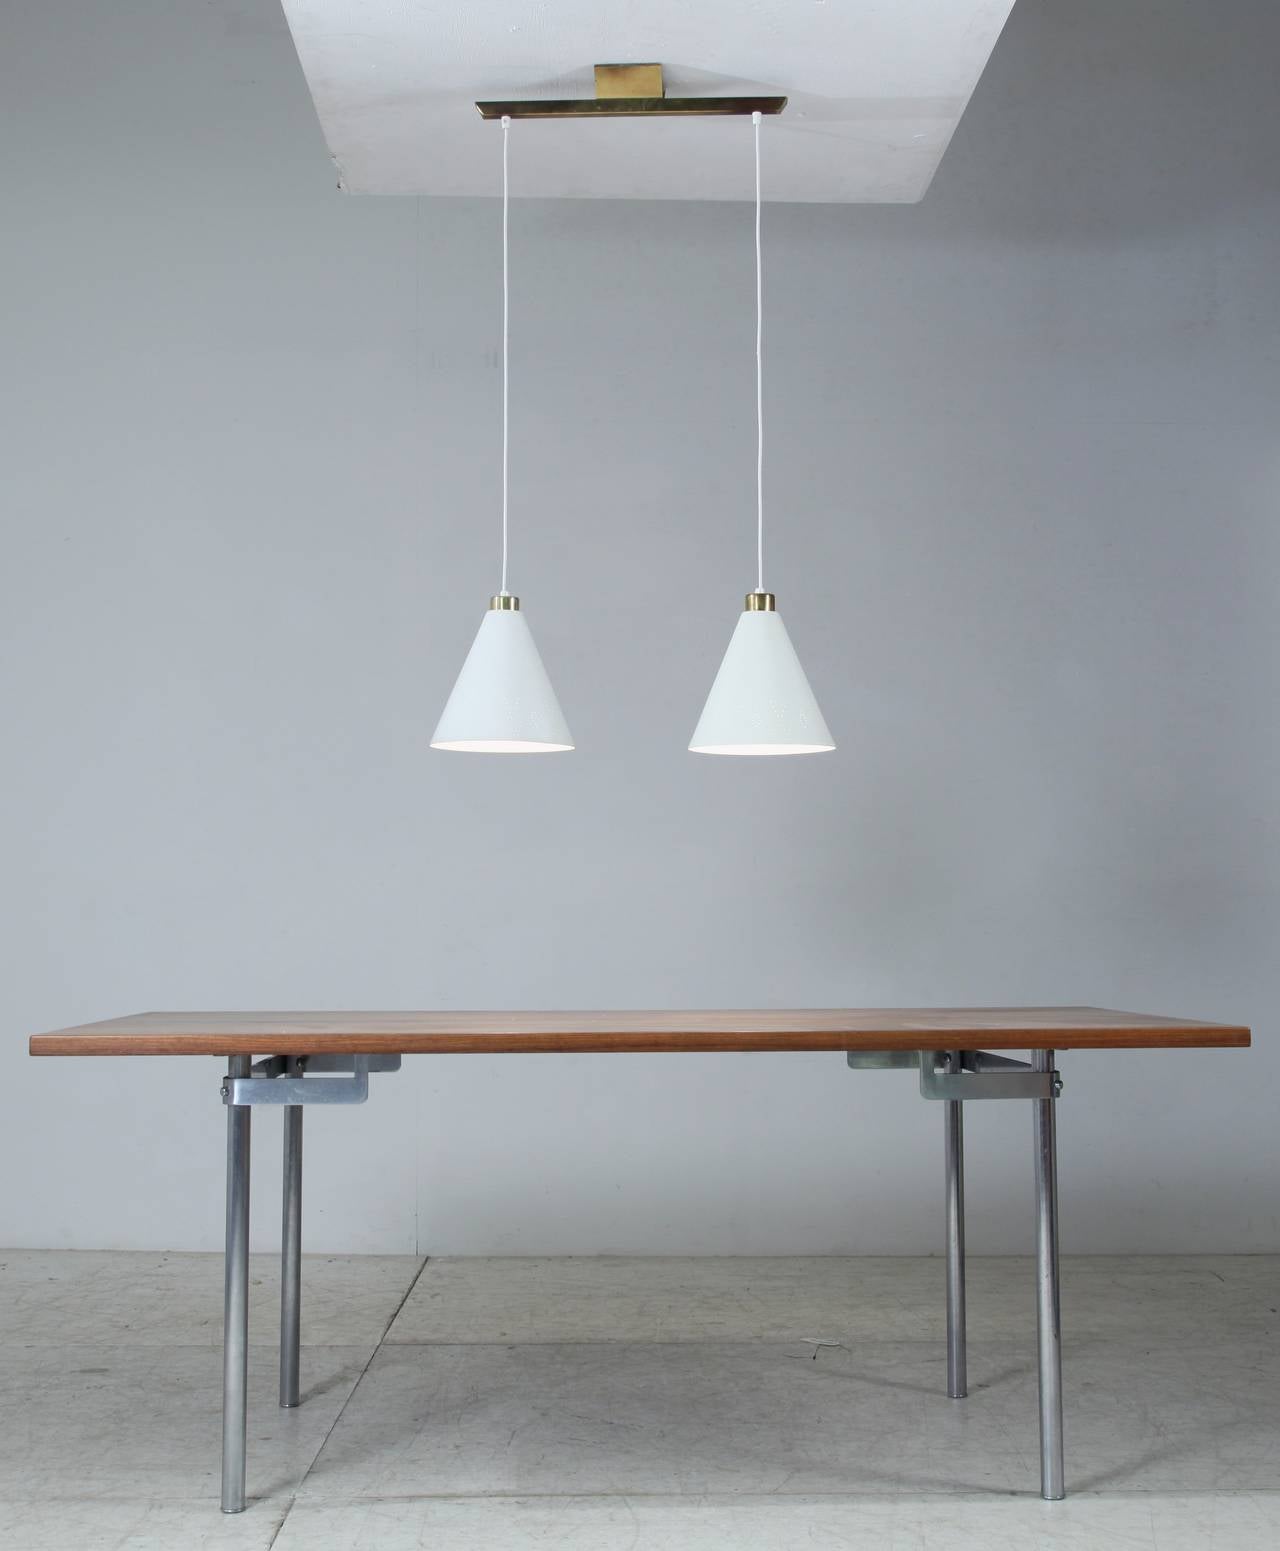 A rare model K2-60 pendant by Paavo Tynell with two shades hanging from a rail. The metal shades are painted white and have the typical Tynell pinhole perforations, here in a less typical geometric pattern.